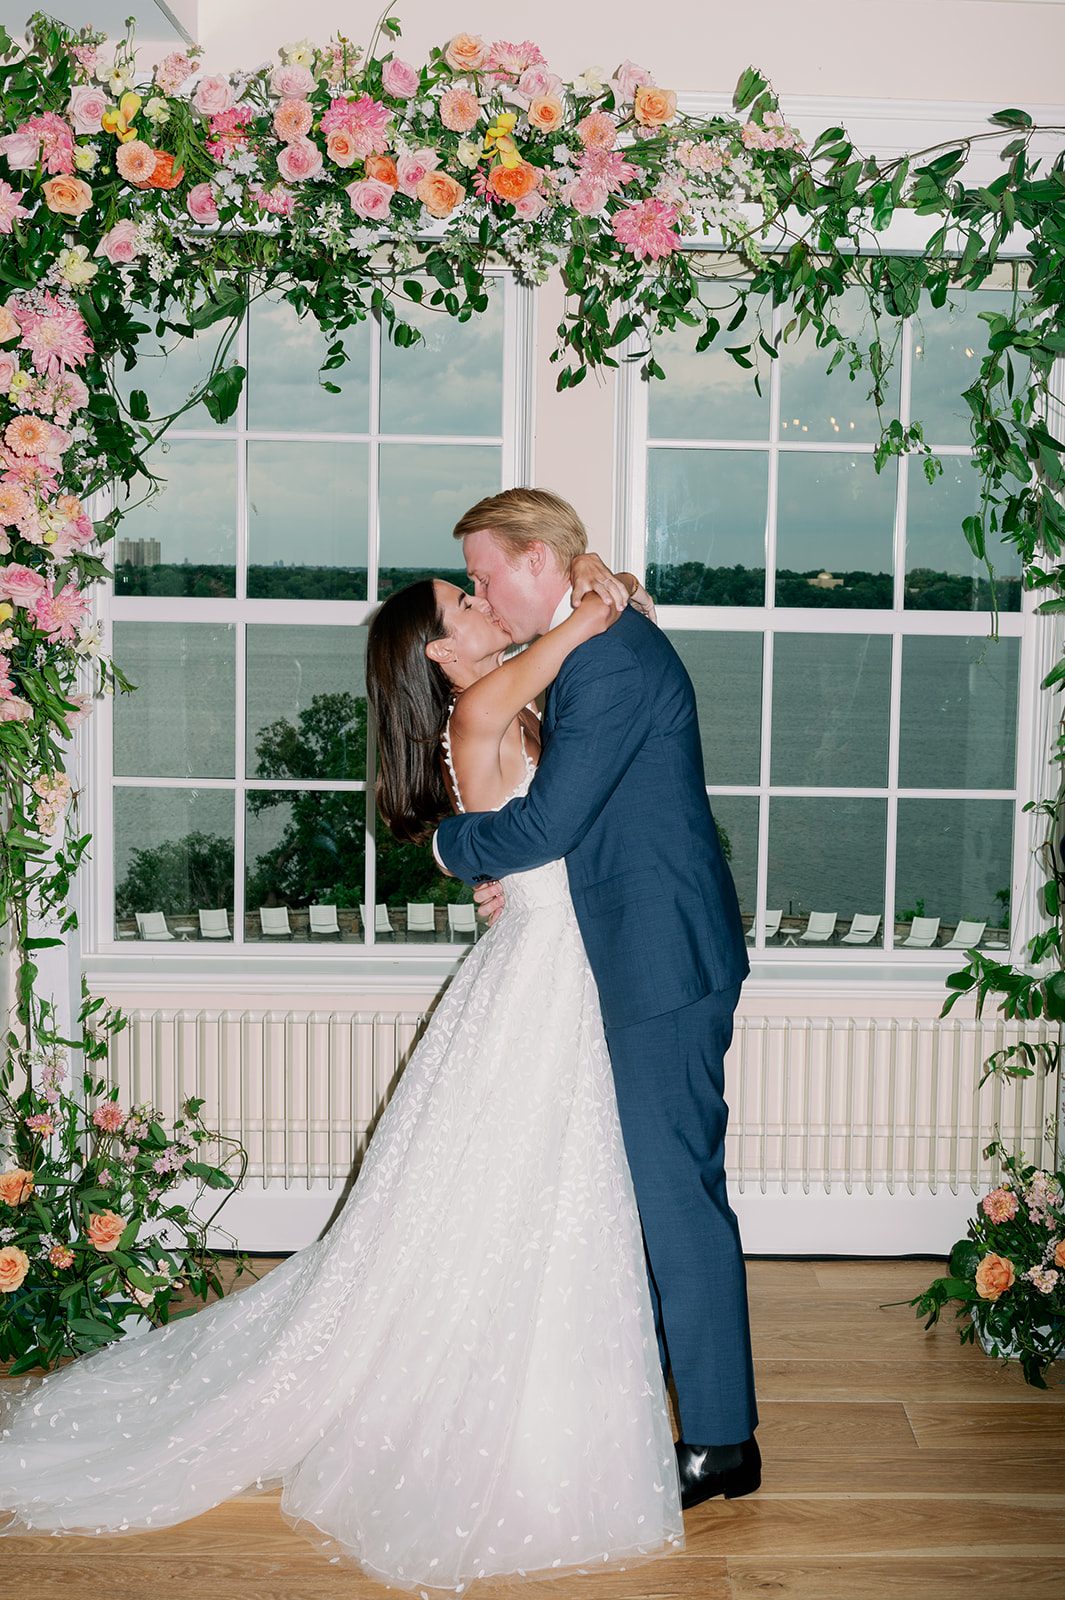 Bride and groom first kiss under a floral arch during their indoor wedding ceremony at Minikahda Club.